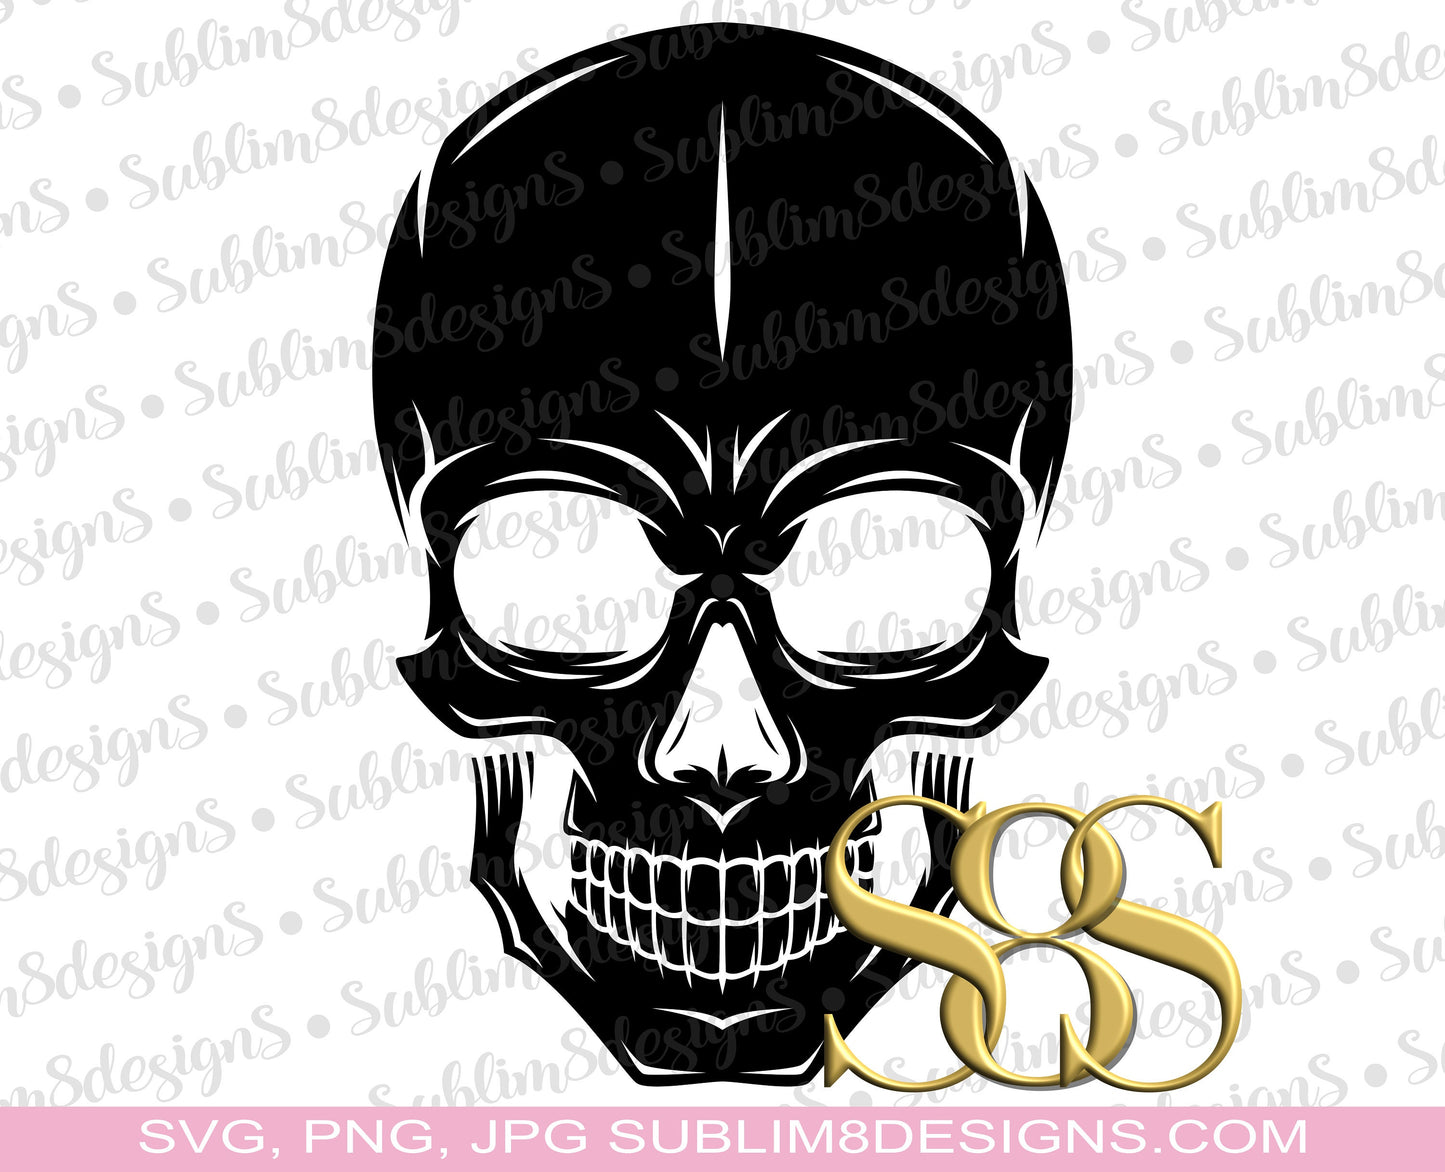 Skull SVG, PNG and JPG